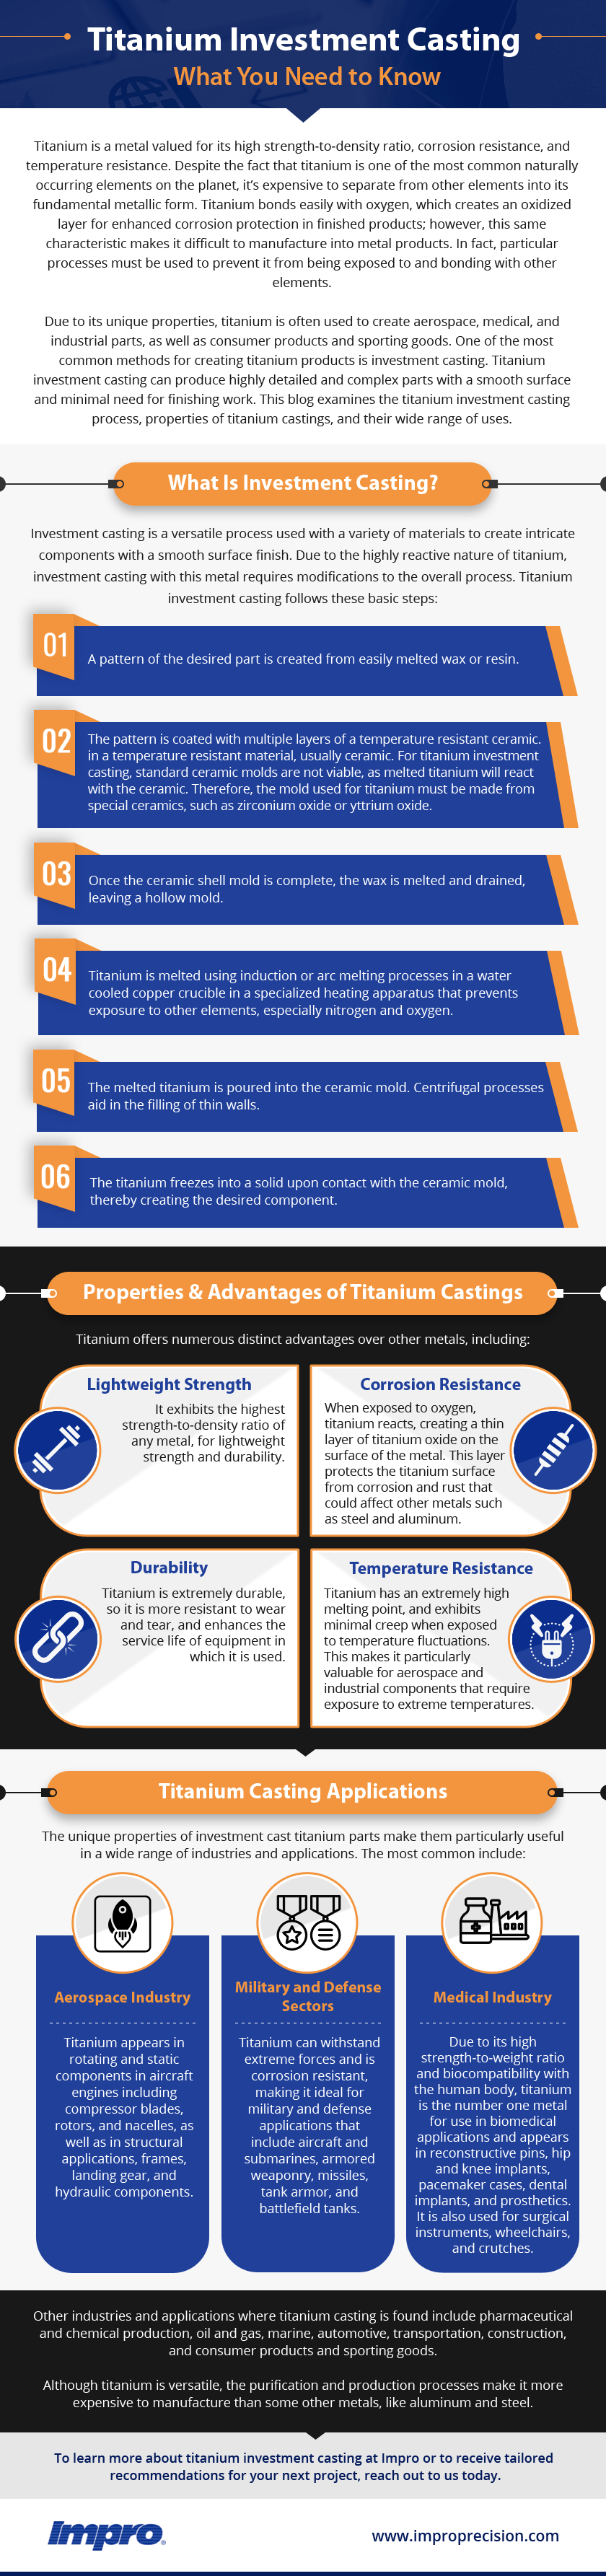 Titanium Investment Casting What You Need to Know